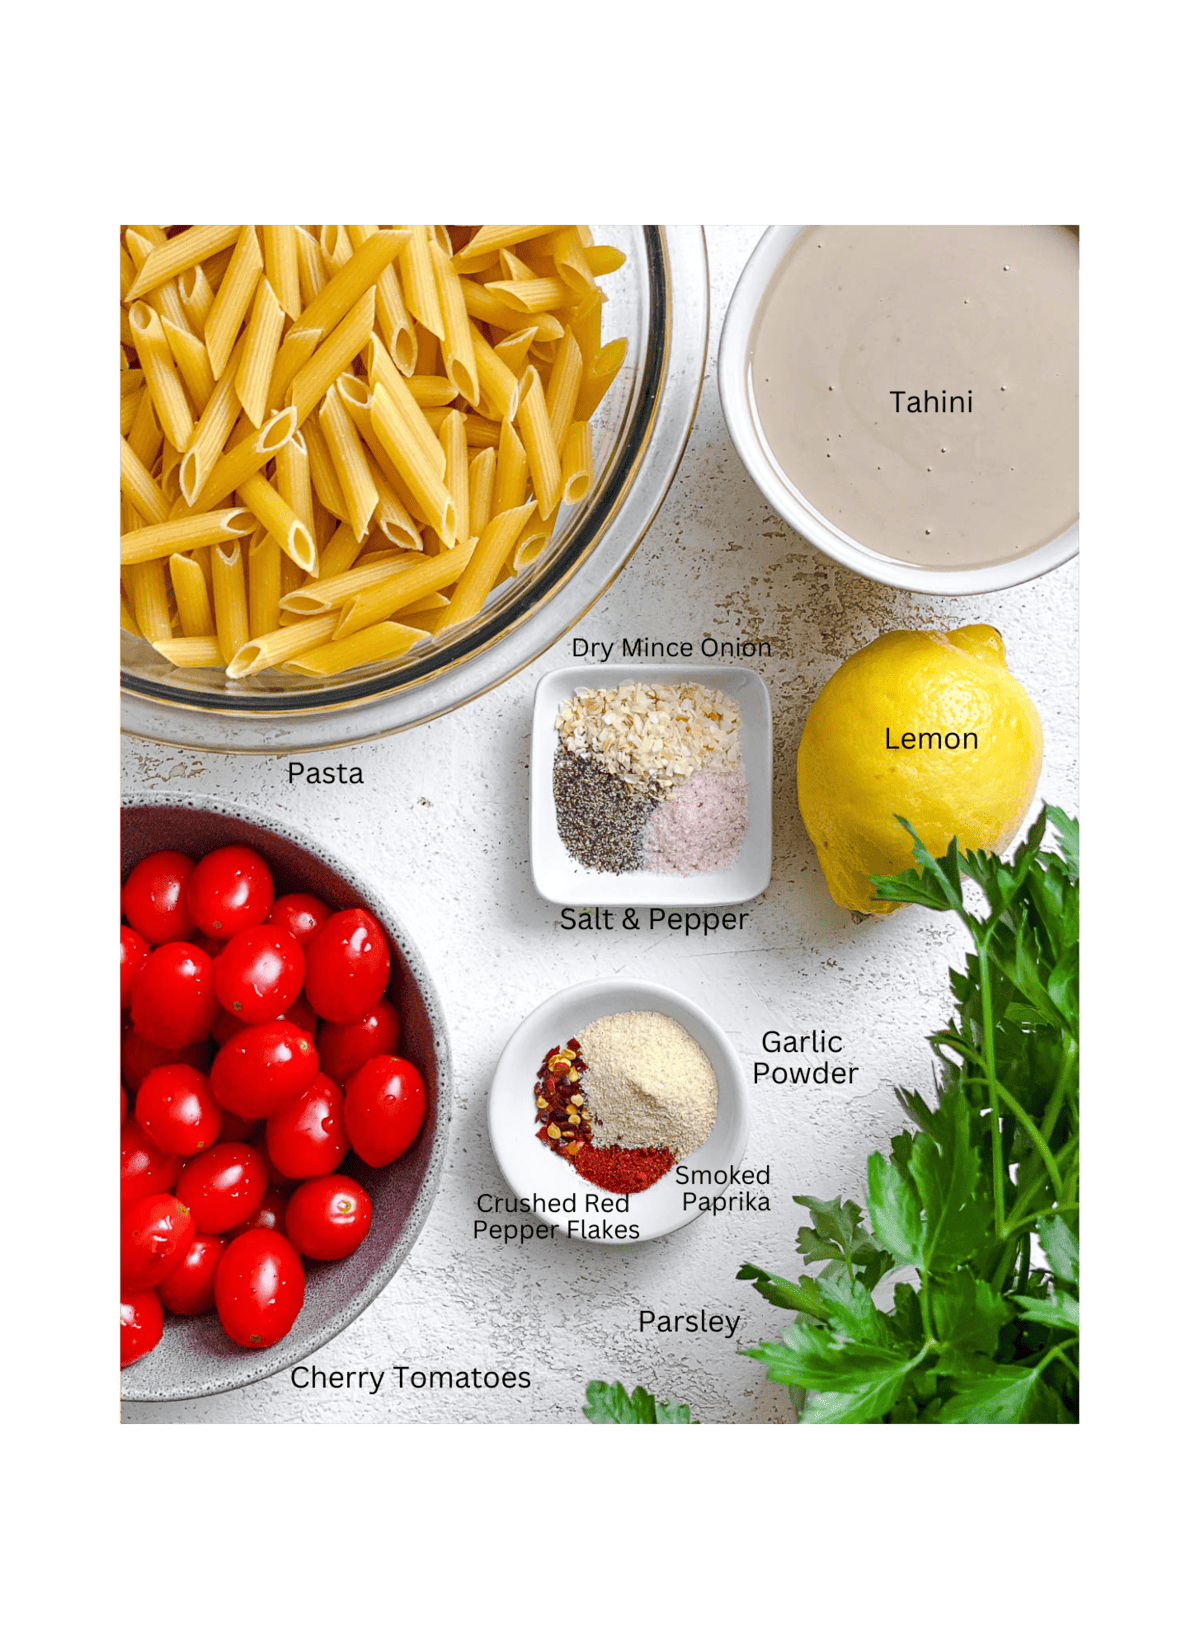 ingredients for 20-Minute Creamy Tahini Pasta measured out against a white surface